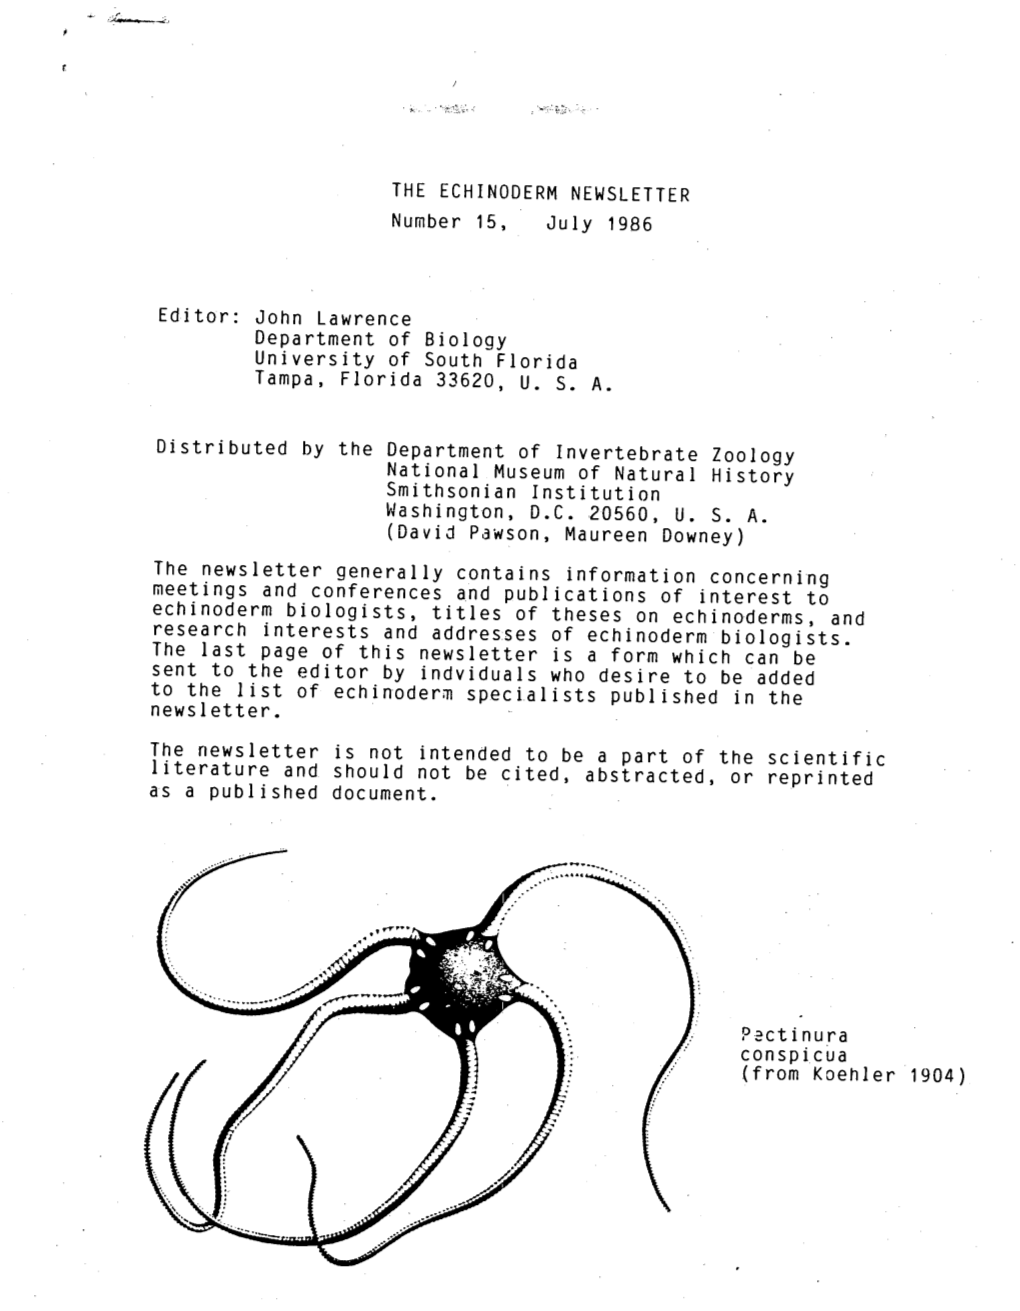 THE ECHINODERM NEWSLETTER Number 15, July 1986 Editor